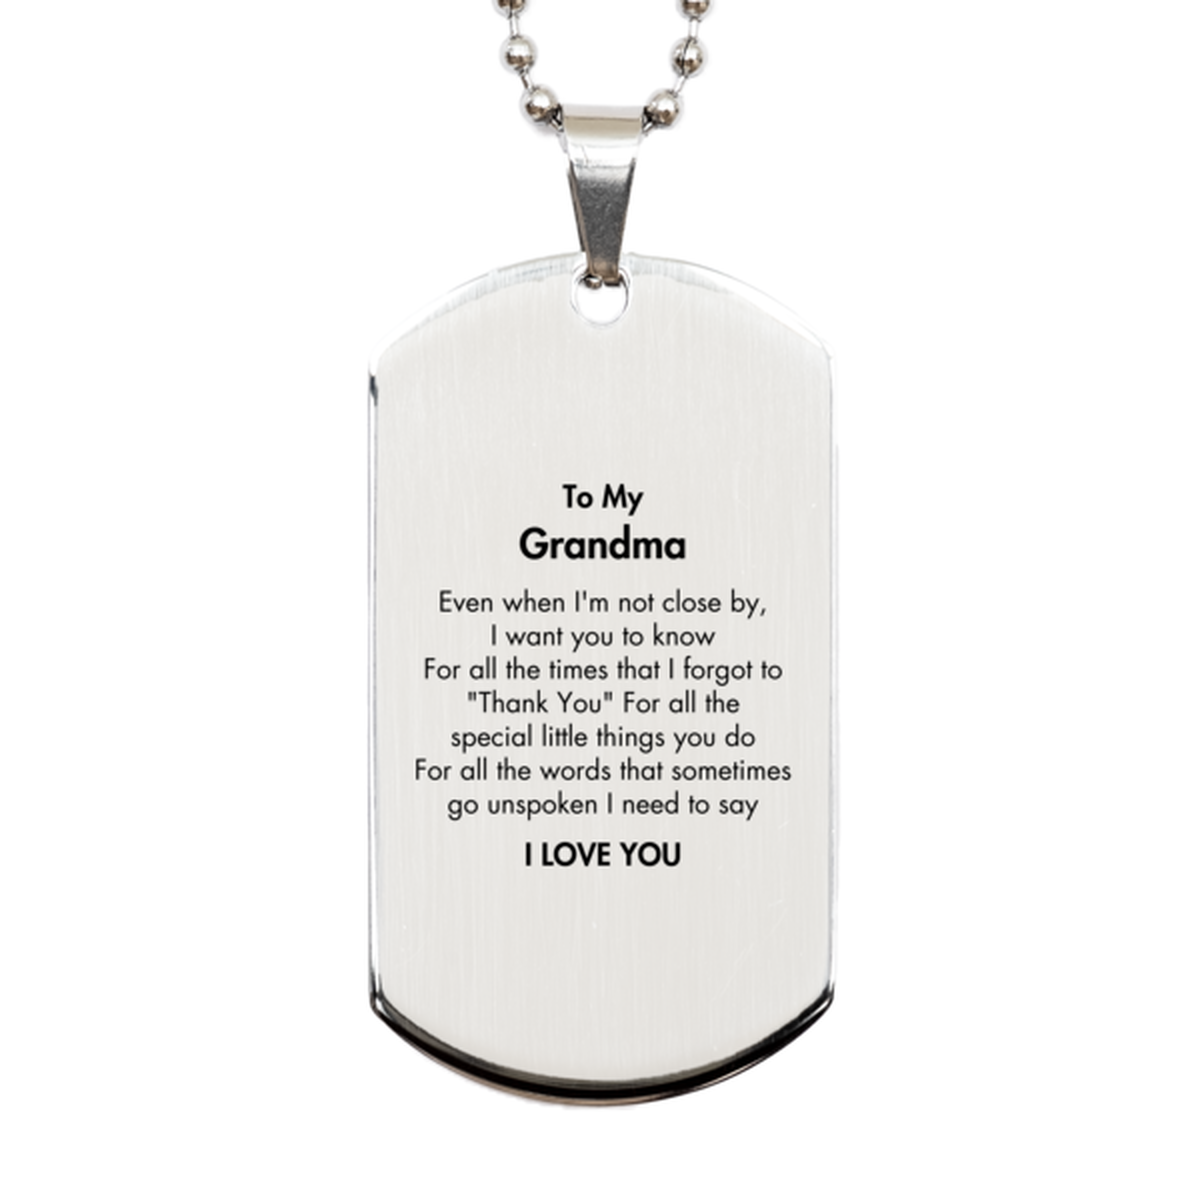 Thank You Gifts for Grandma, Keepsake Silver Dog Tag Gifts for Grandma Birthday Mother's day Father's Day Grandma For all the words That sometimes go unspoken I need to say I LOVE YOU